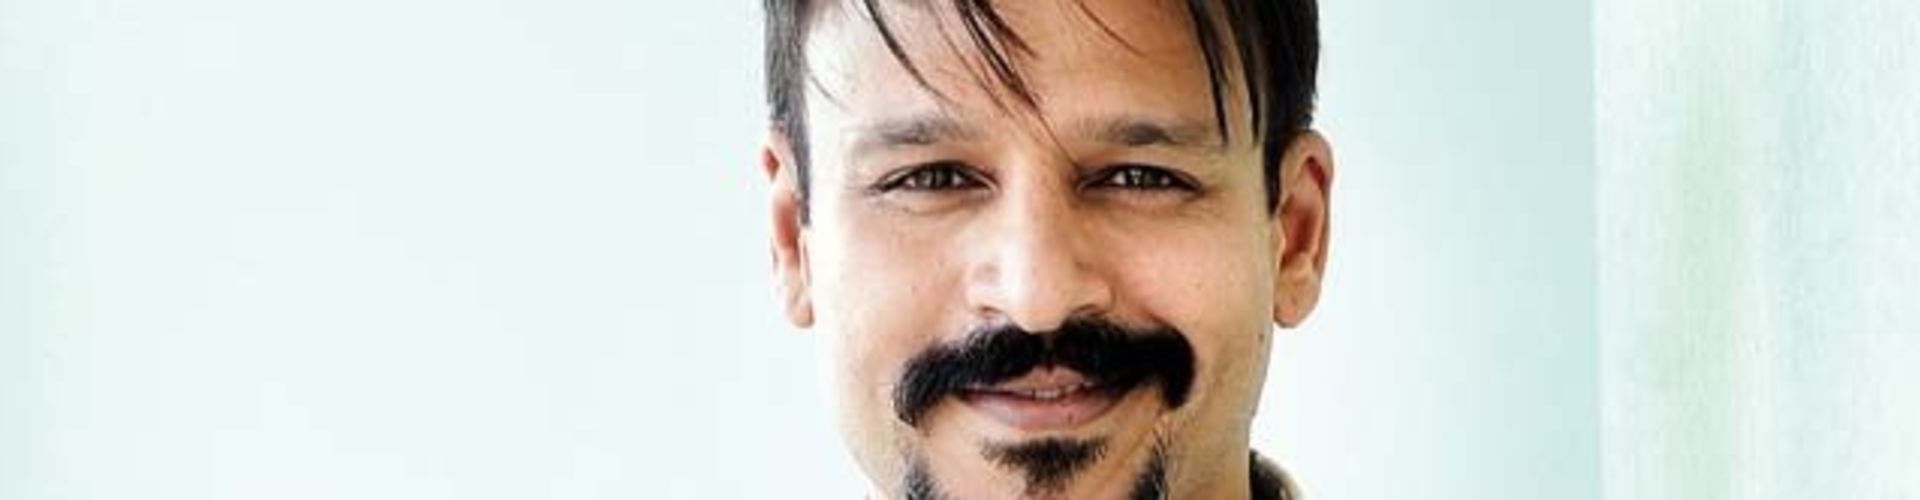 Digital space is more democratic and it levels the field as compared to cinema says Vivek Oberoi